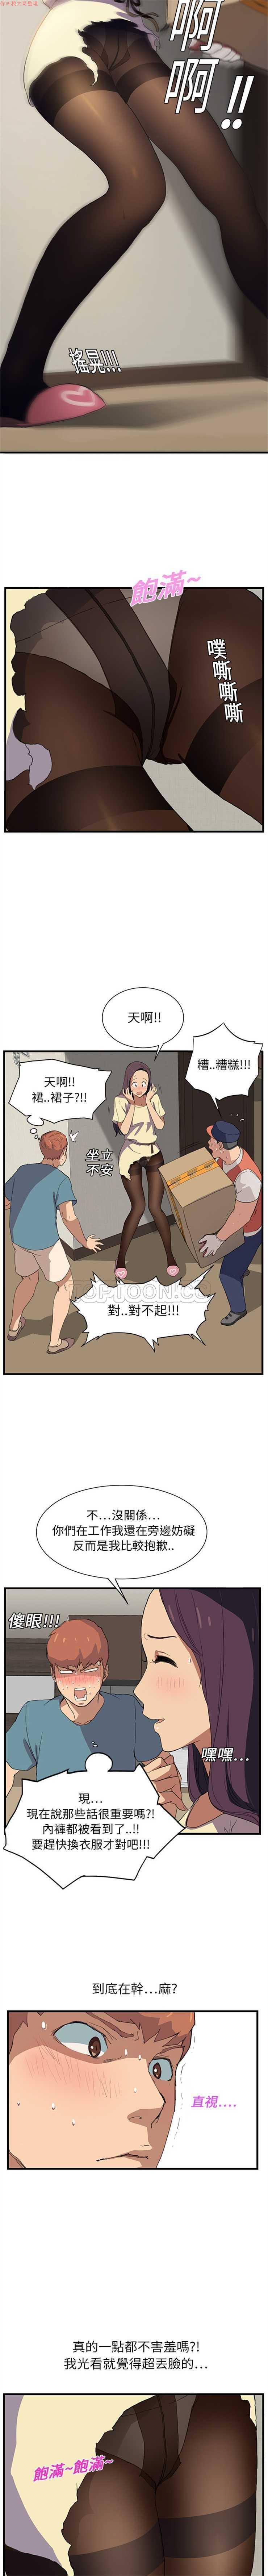 Work 继母 Chinese Stripper - Page 9